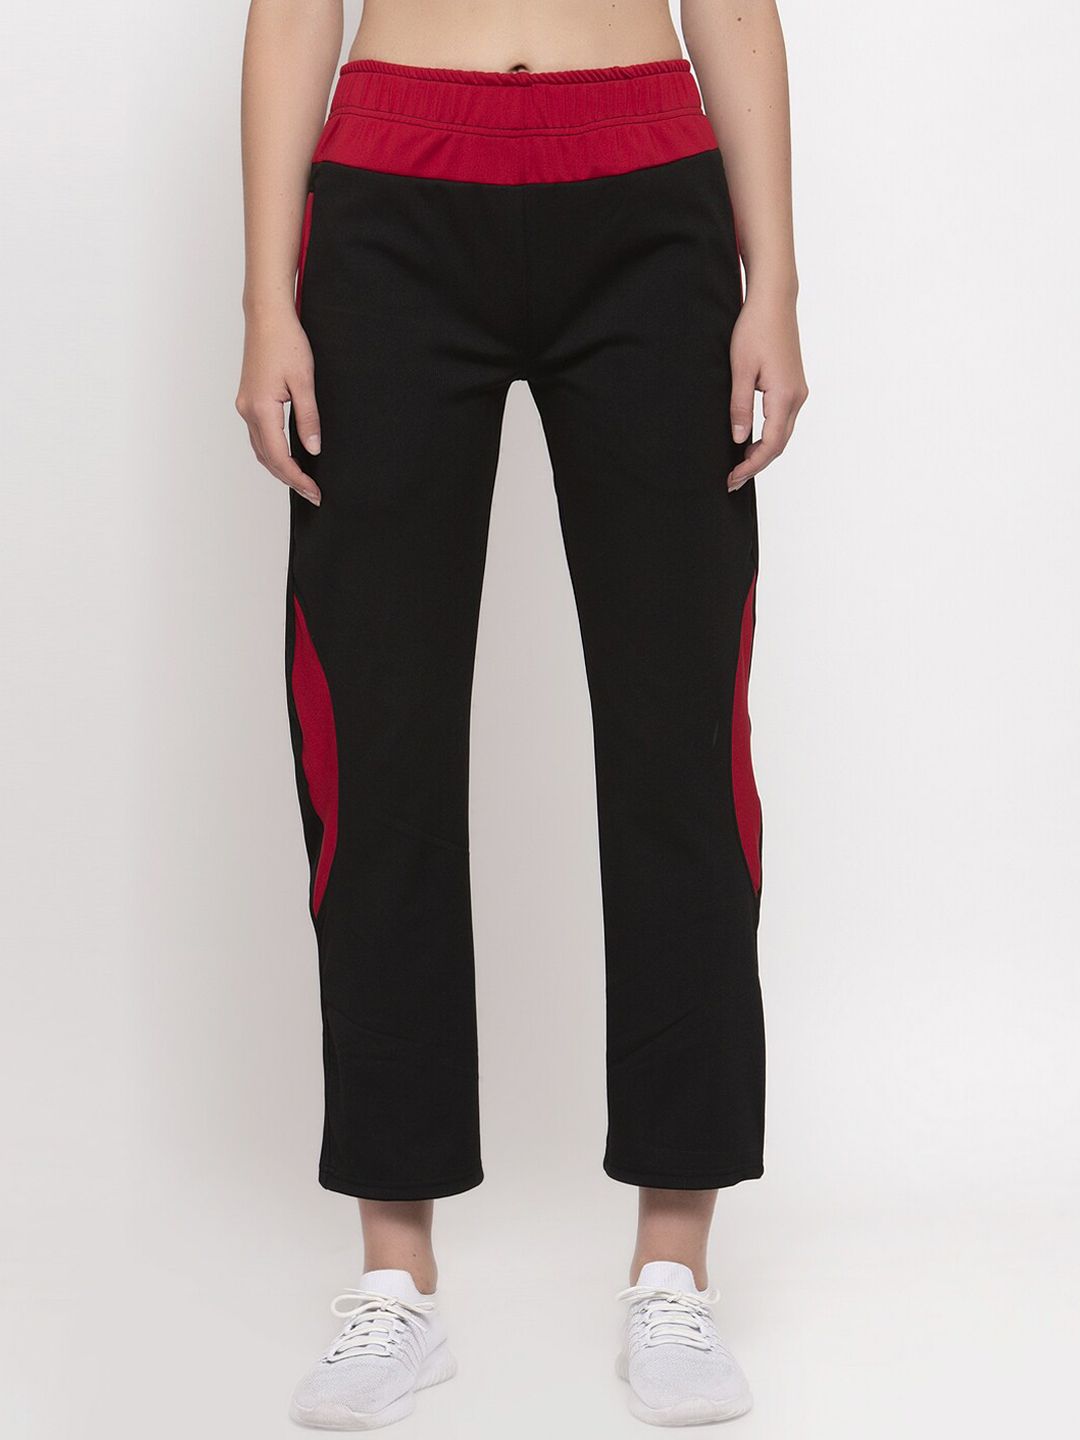 CUKOO Women Black & Red Solid Trackpants Price in India